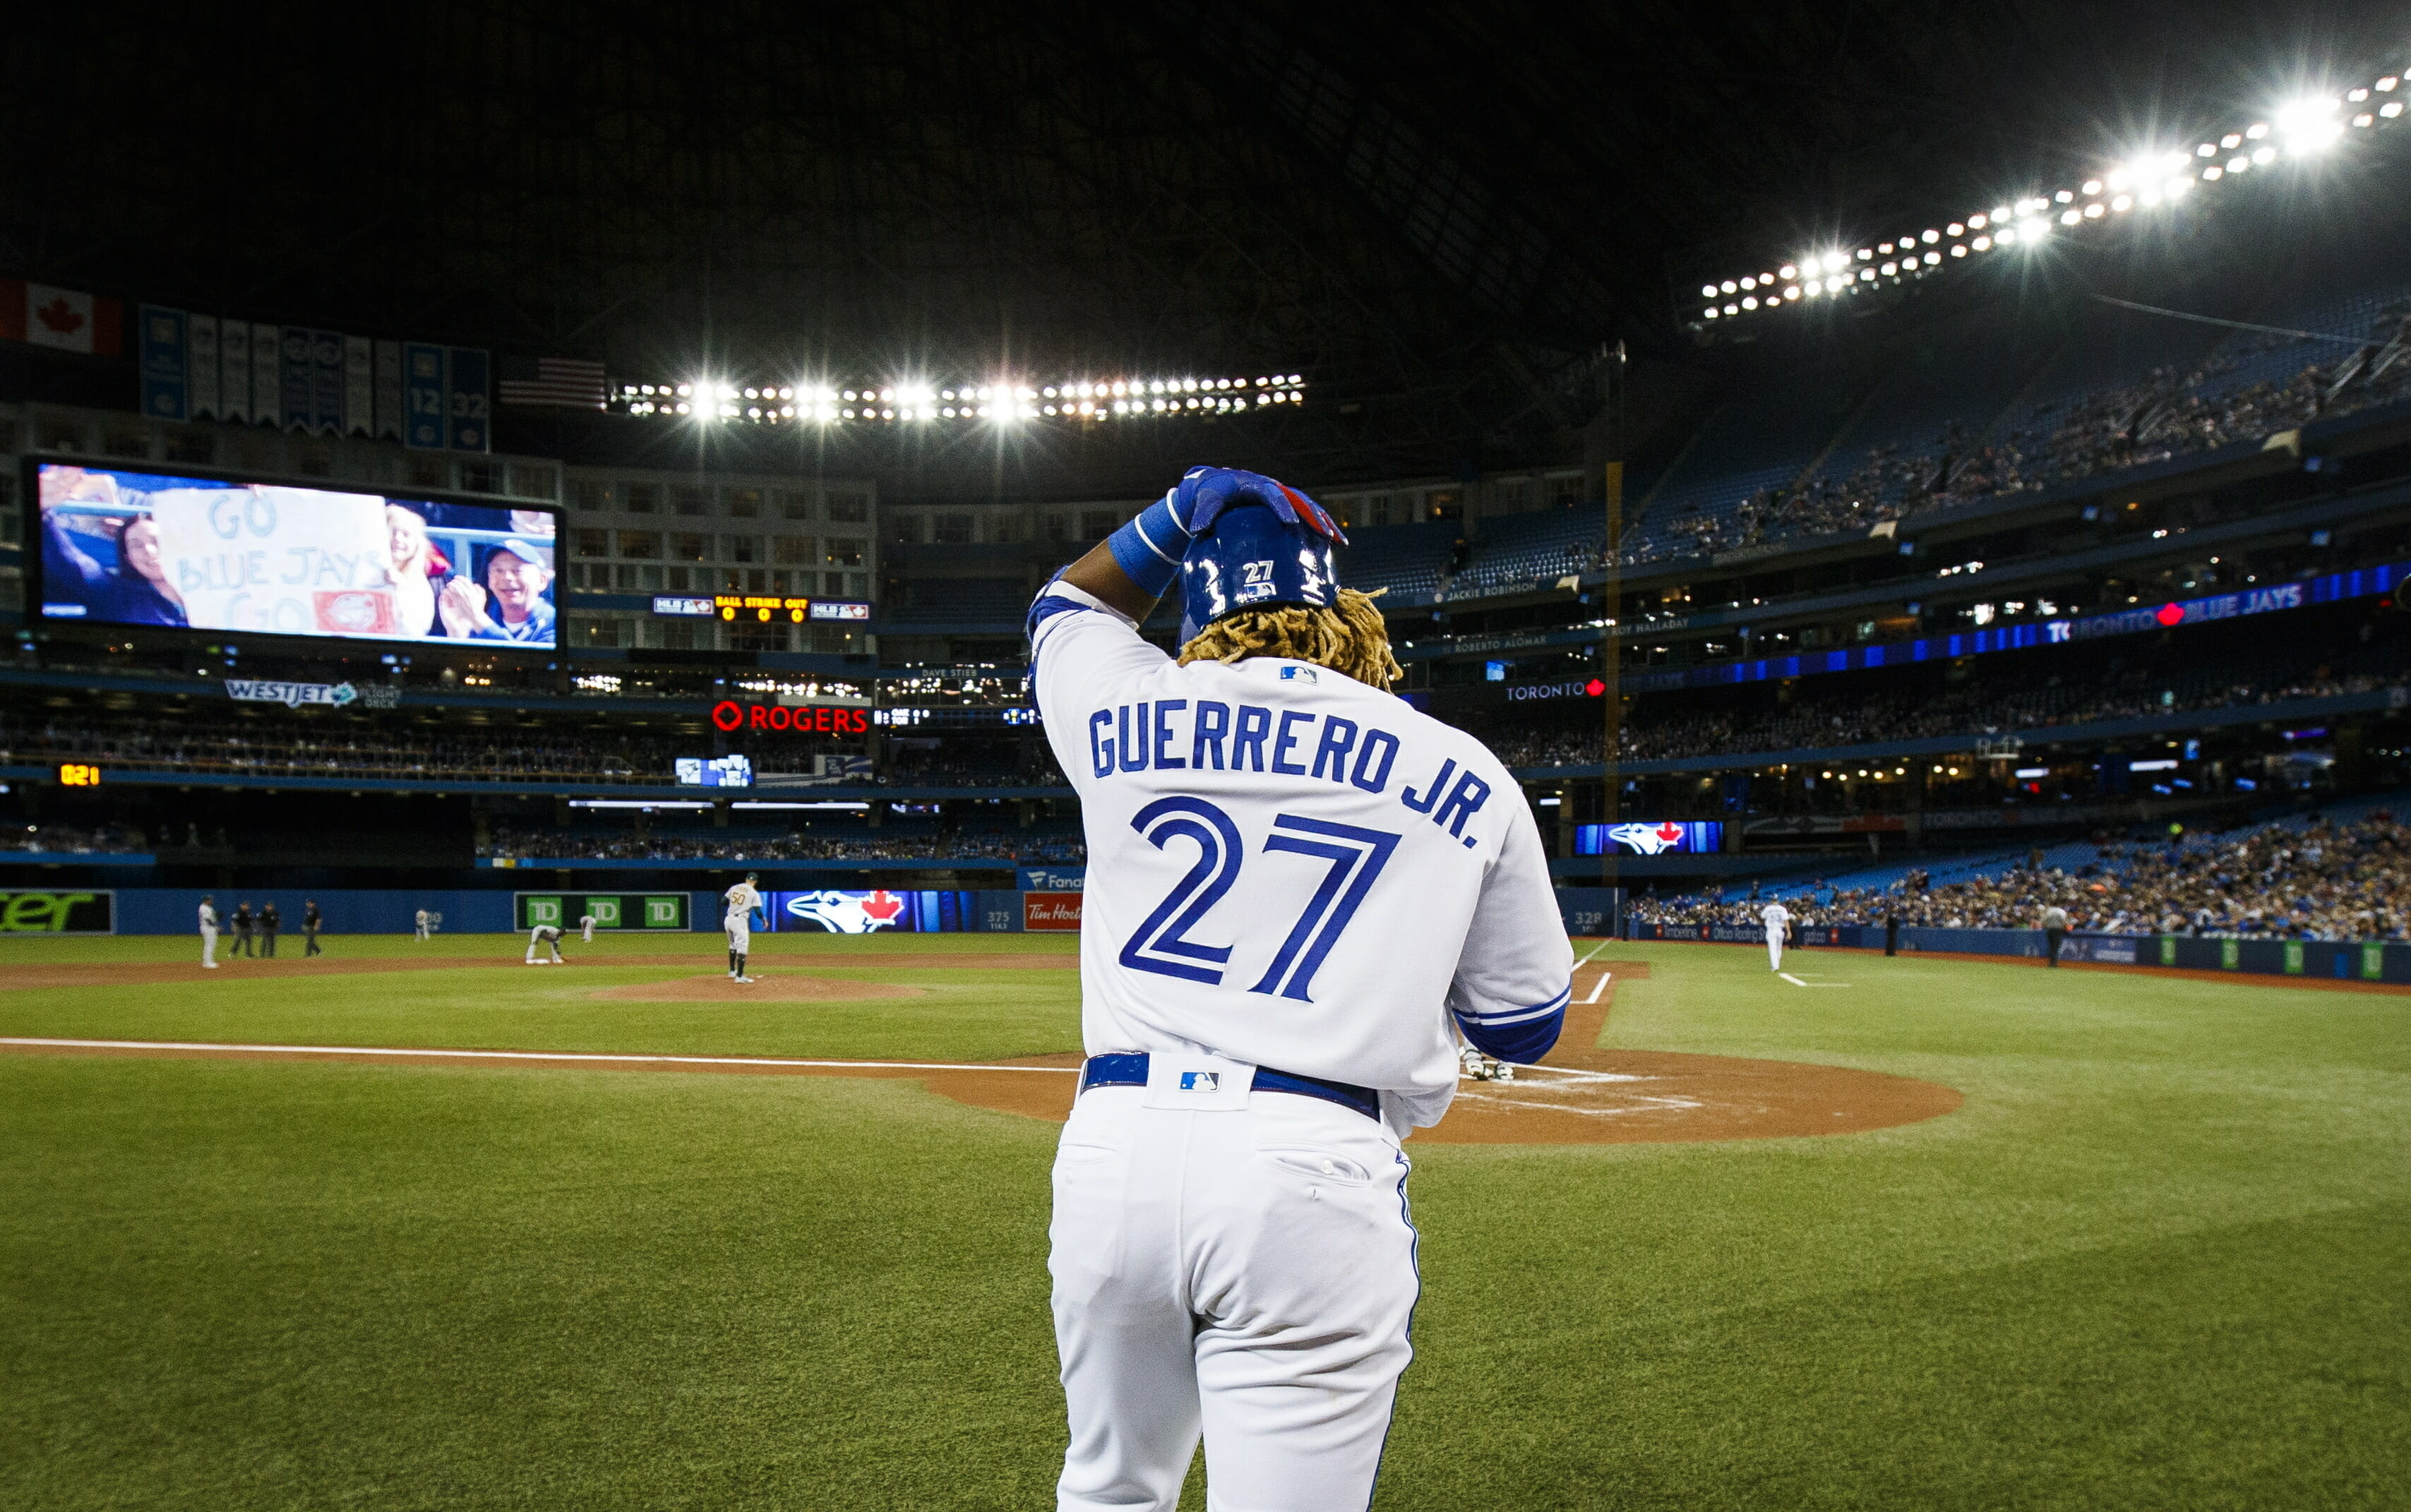 Toronto Blue Jays rookie Vladimir Guerrero Jr. leaves the on-deck circle before his first major league at-bat.